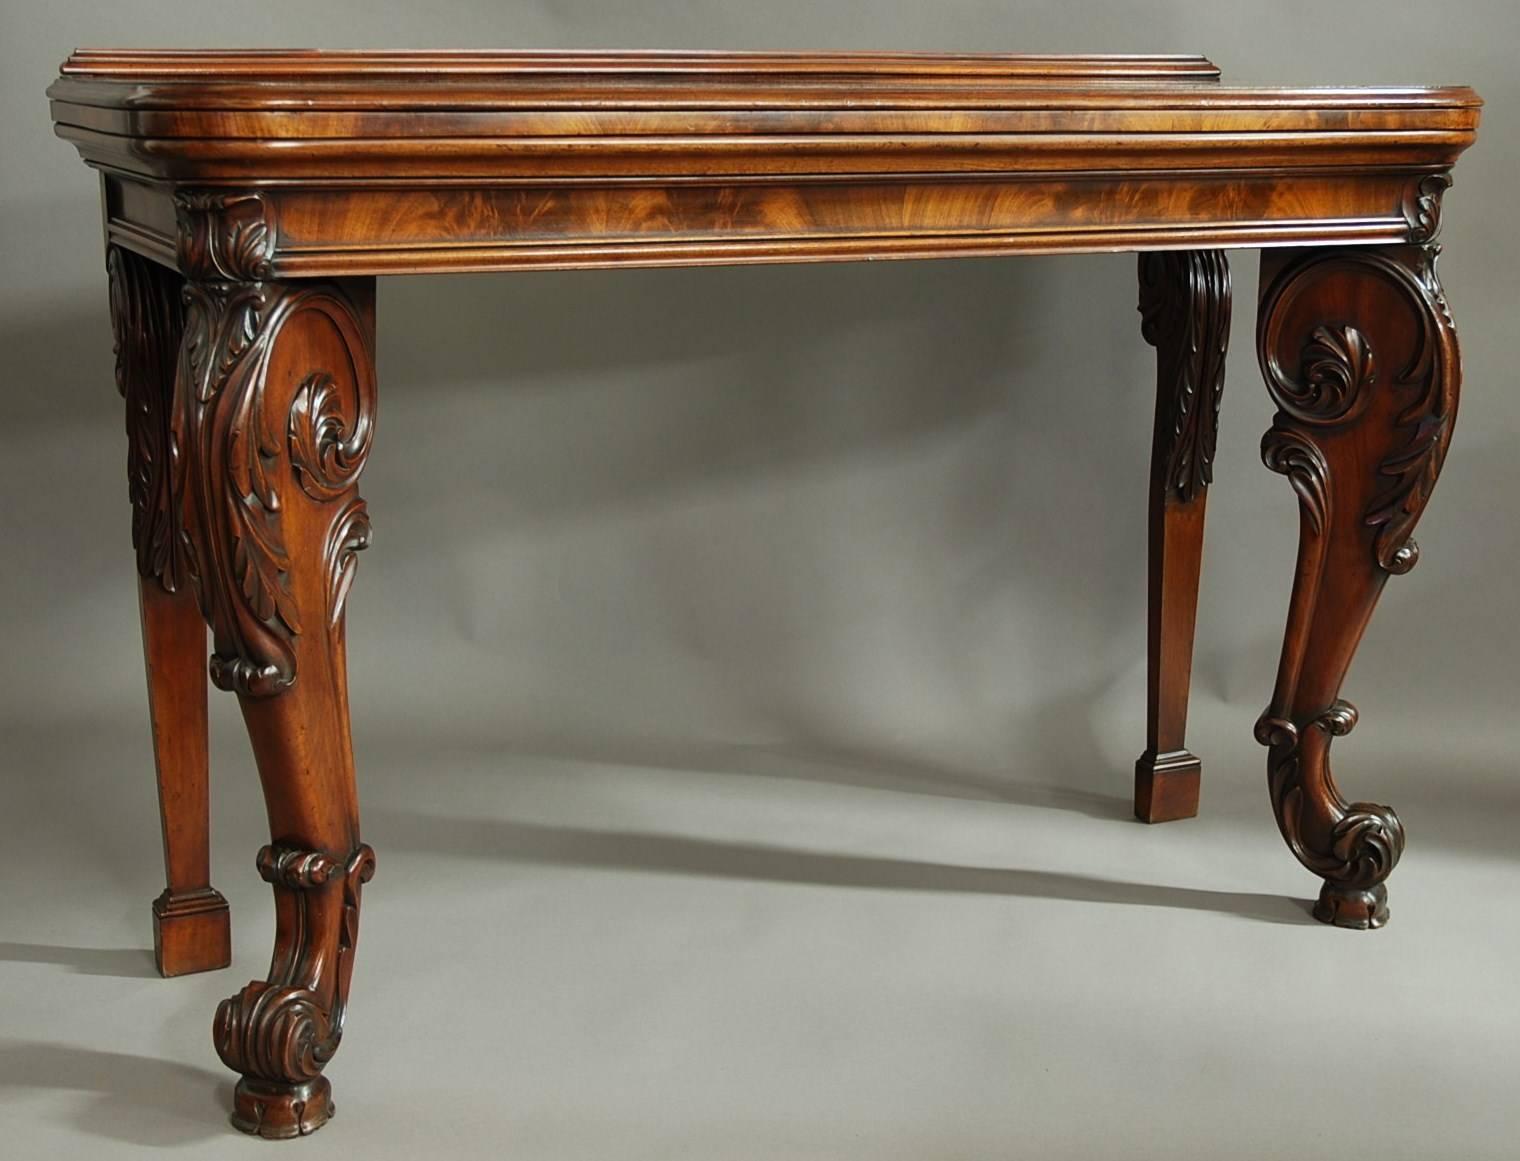 A superb quality William IV mahogany console table with excellent patina and in the manner of Gillows.

This table consists of a fine quality solid mahogany top with low moulding to the back edge (this was to stop items falling from the